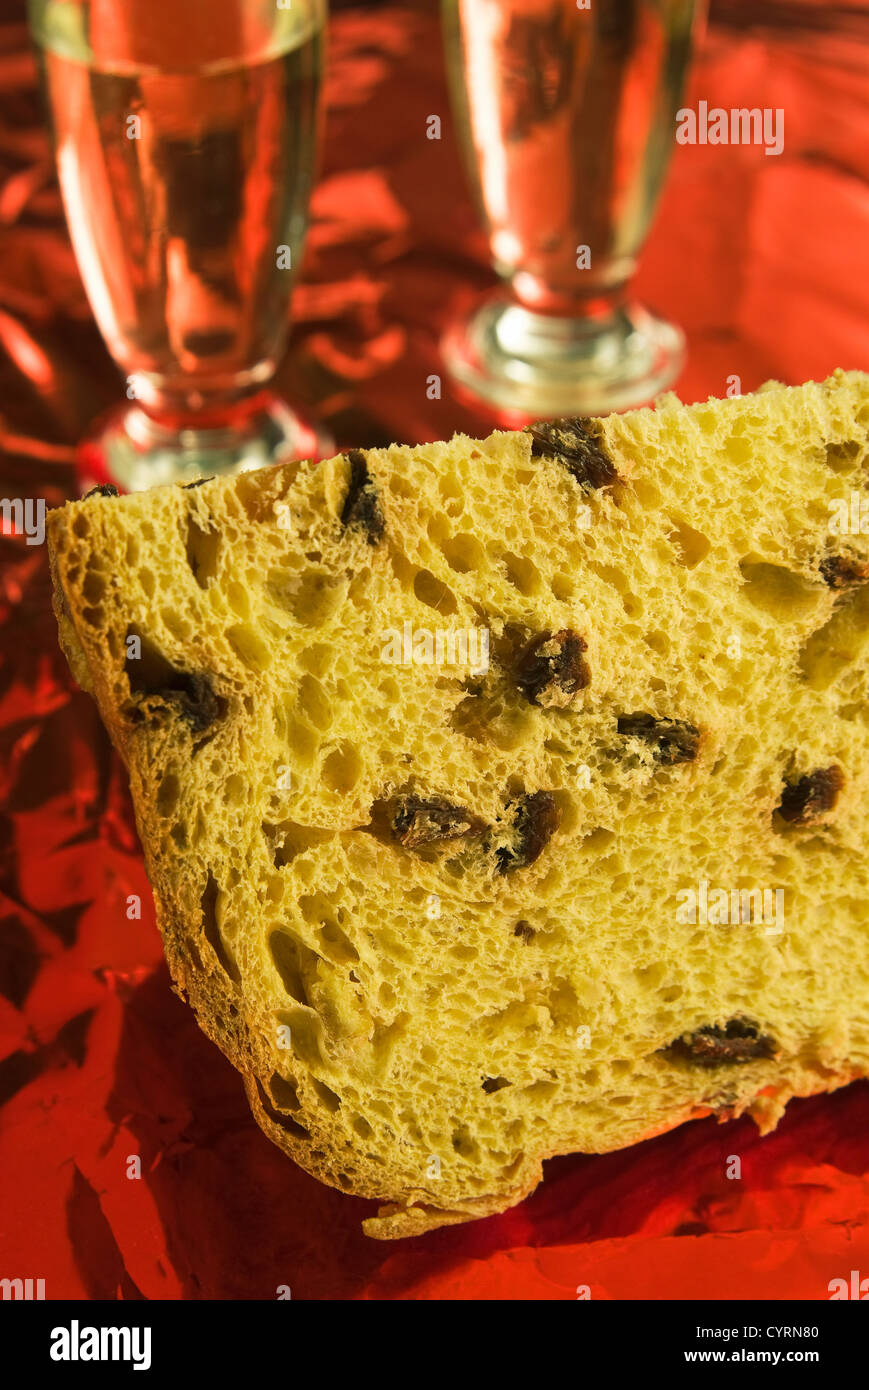 Slice of Panettone (is a type of sweet bread loaf originally from Milan), Christmas cake, Italy Stock Photo